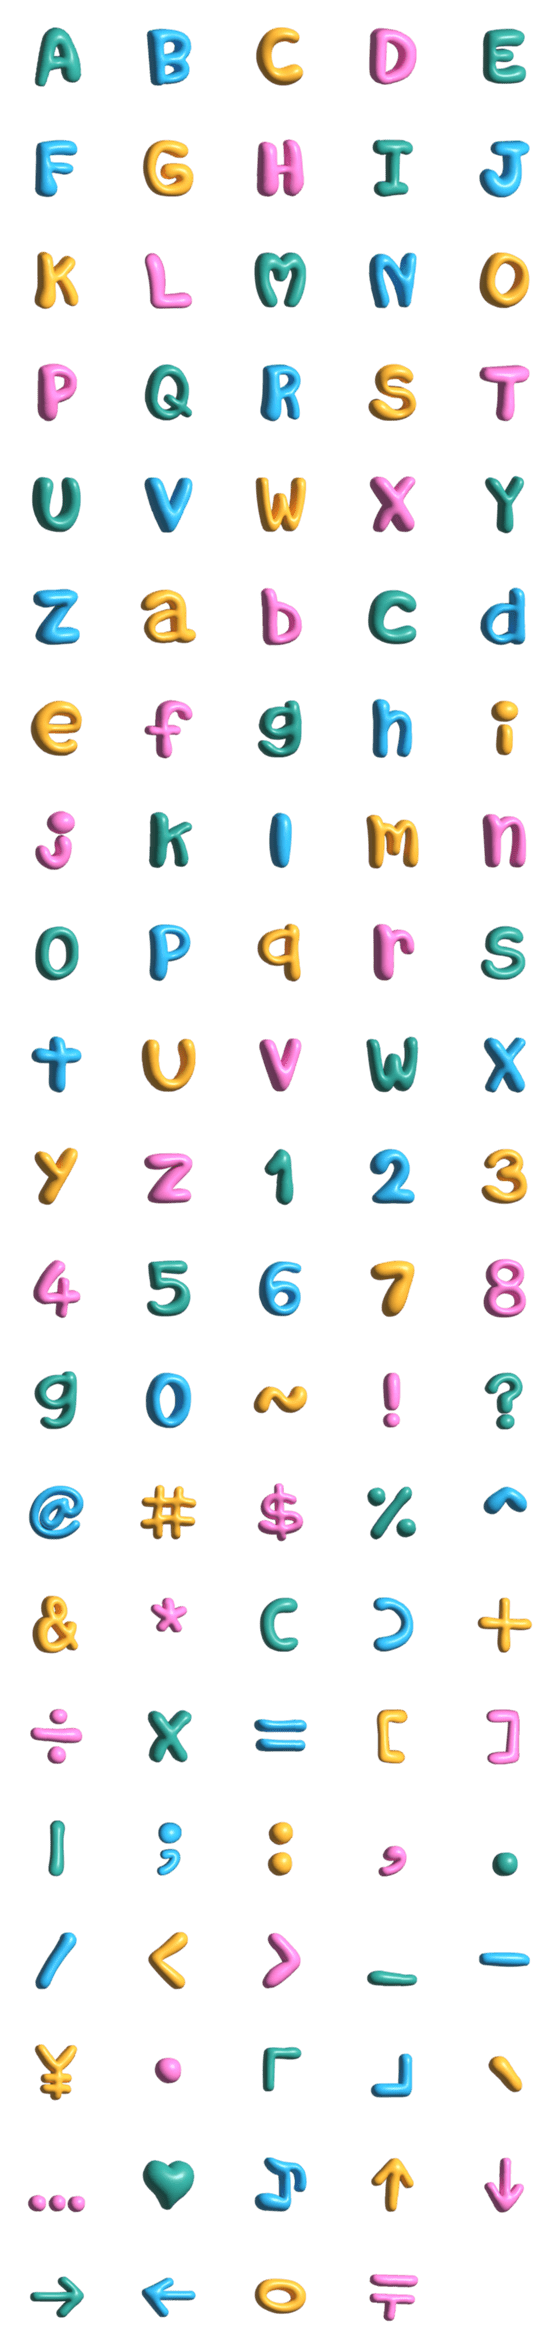 [LINE絵文字]Colorful Puffy Font (animated emoji)の画像一覧